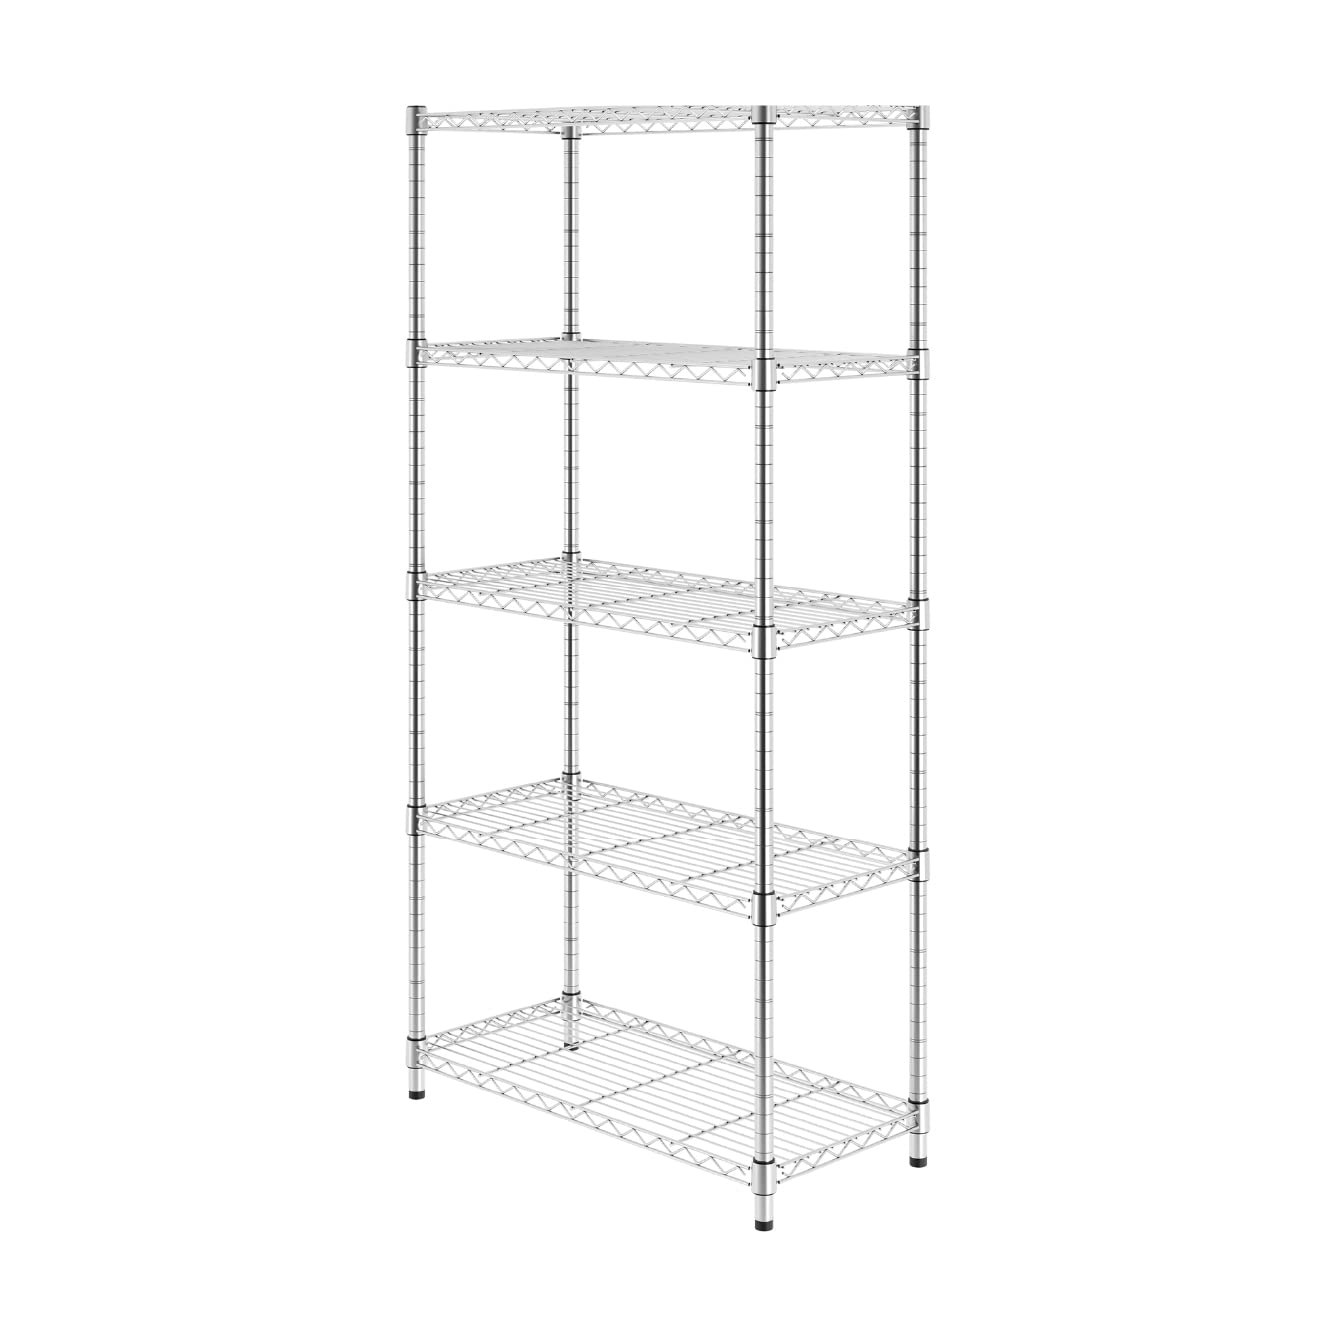 SafeRacks NSF Certified Commercial Grade Adjustable Steel Wire Shelving Rack with Wheels